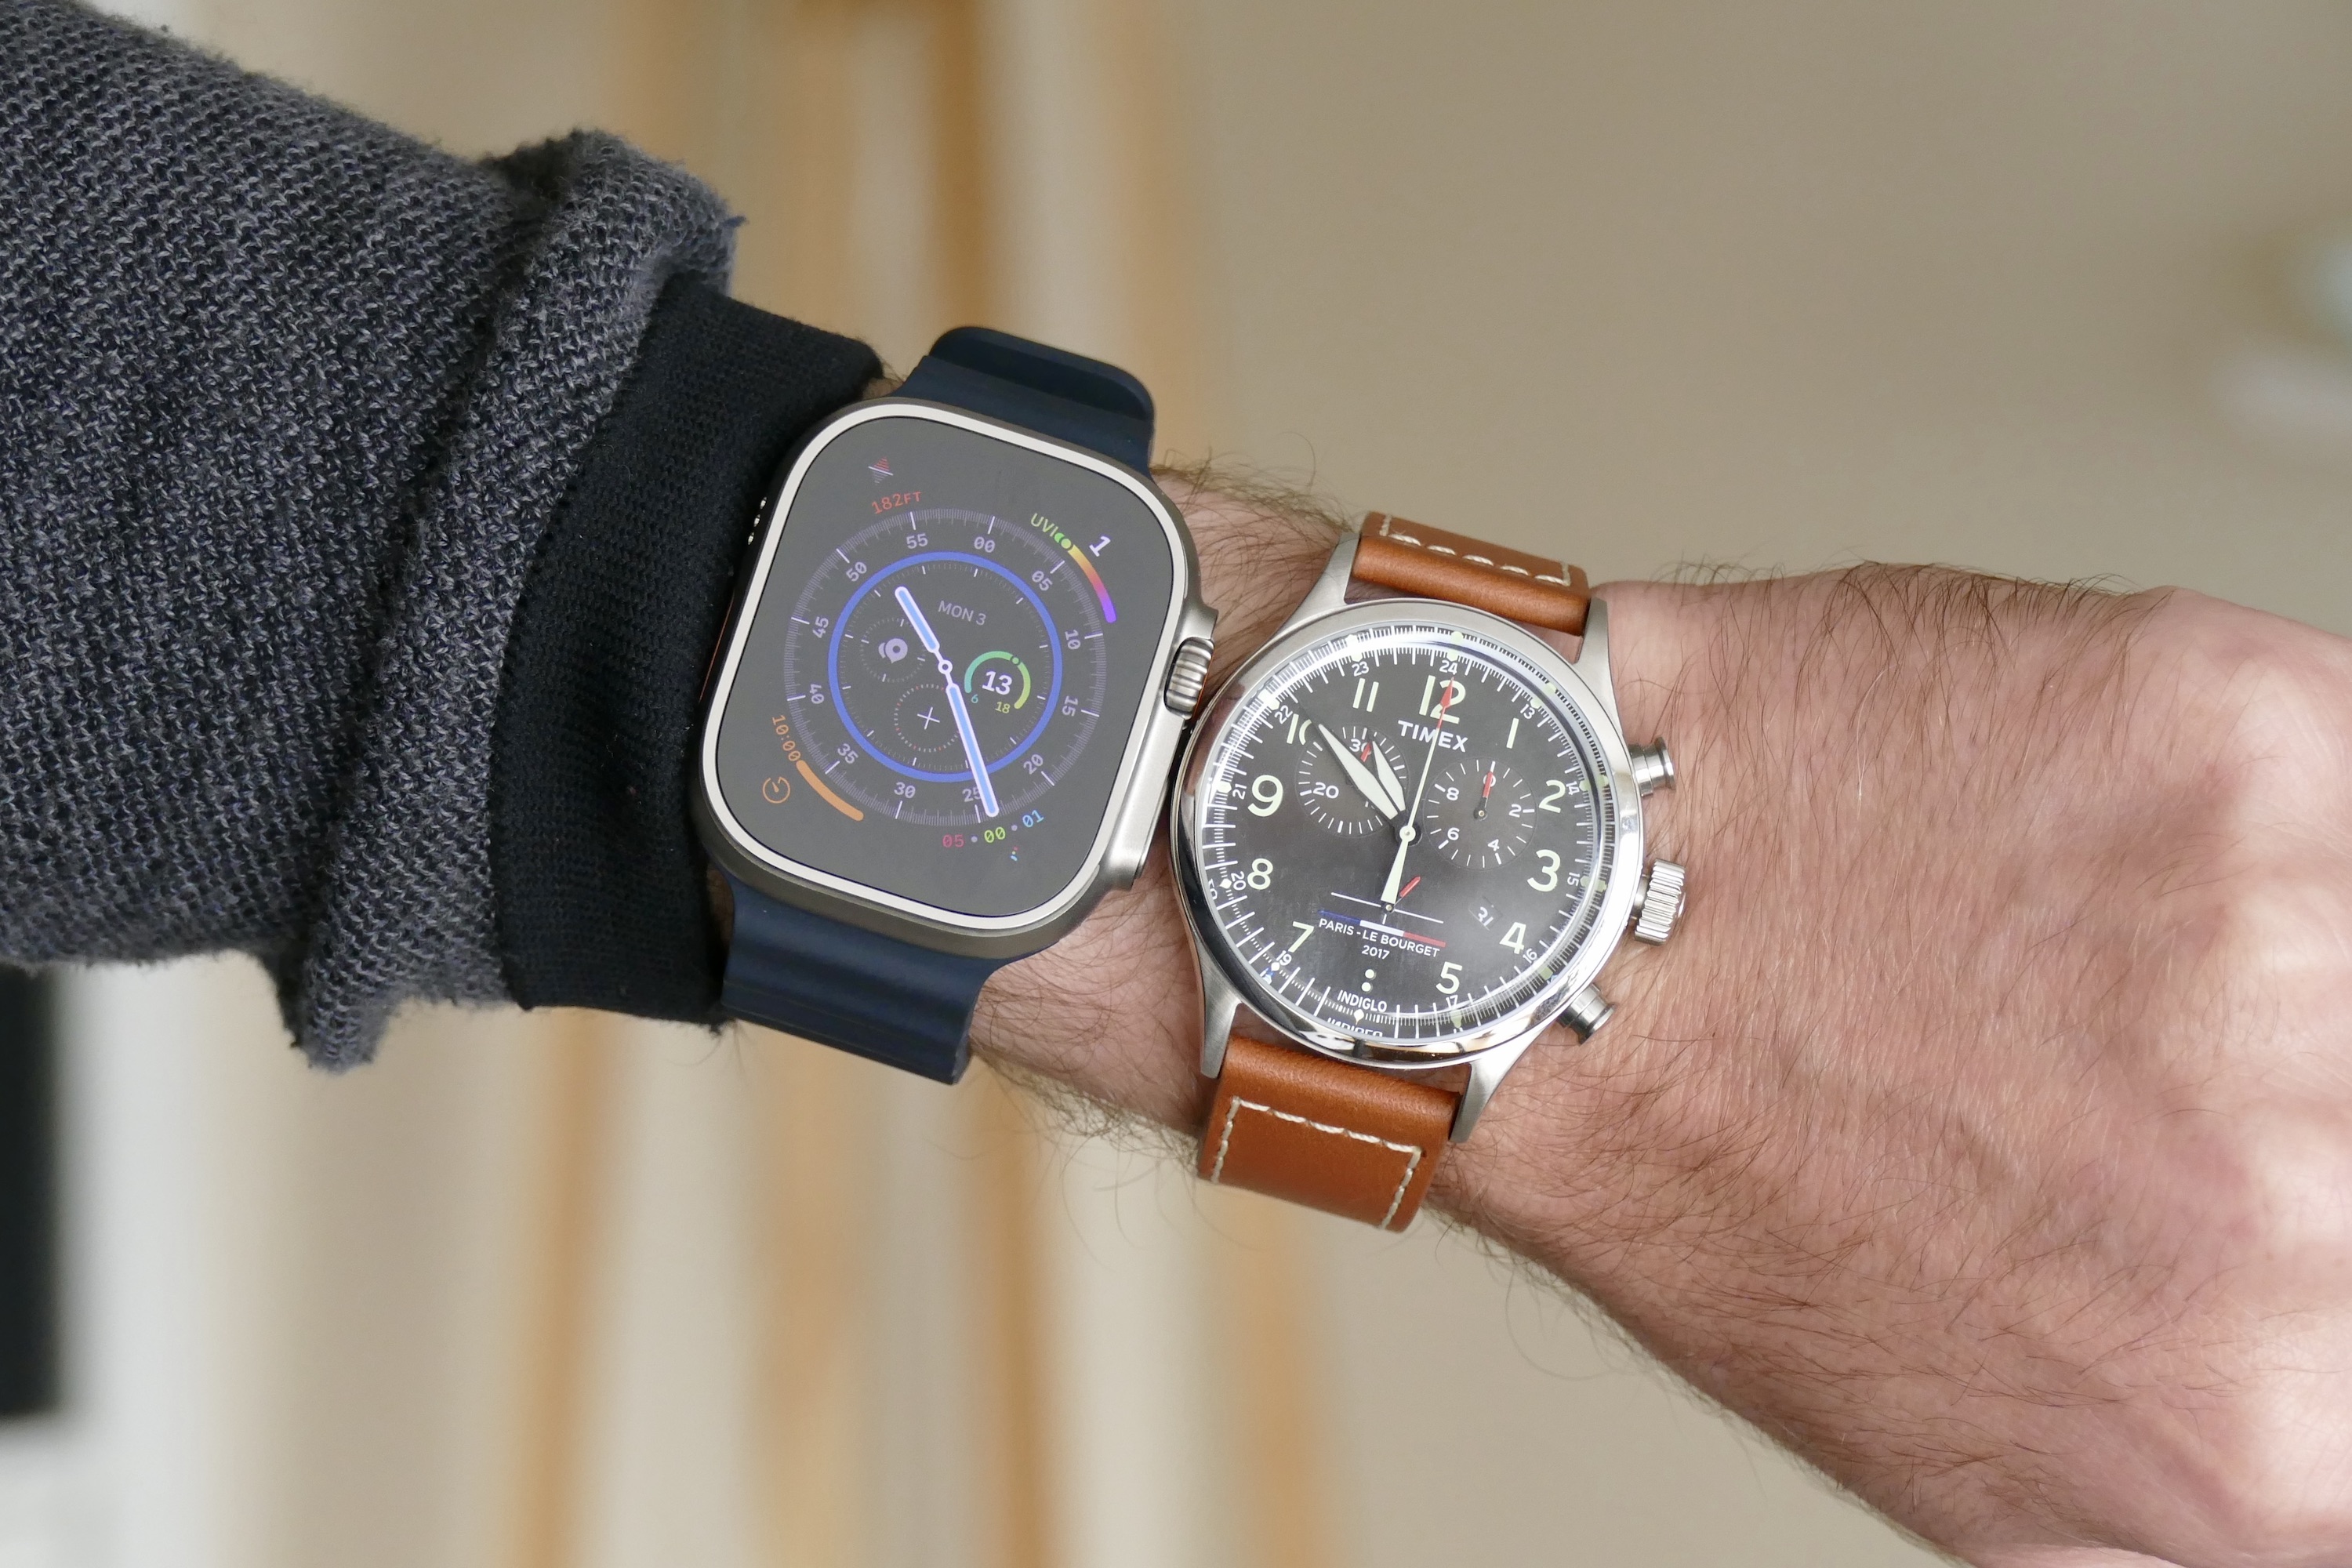 The Apple Watch Ultra and Timex Waterbury Chronograph.